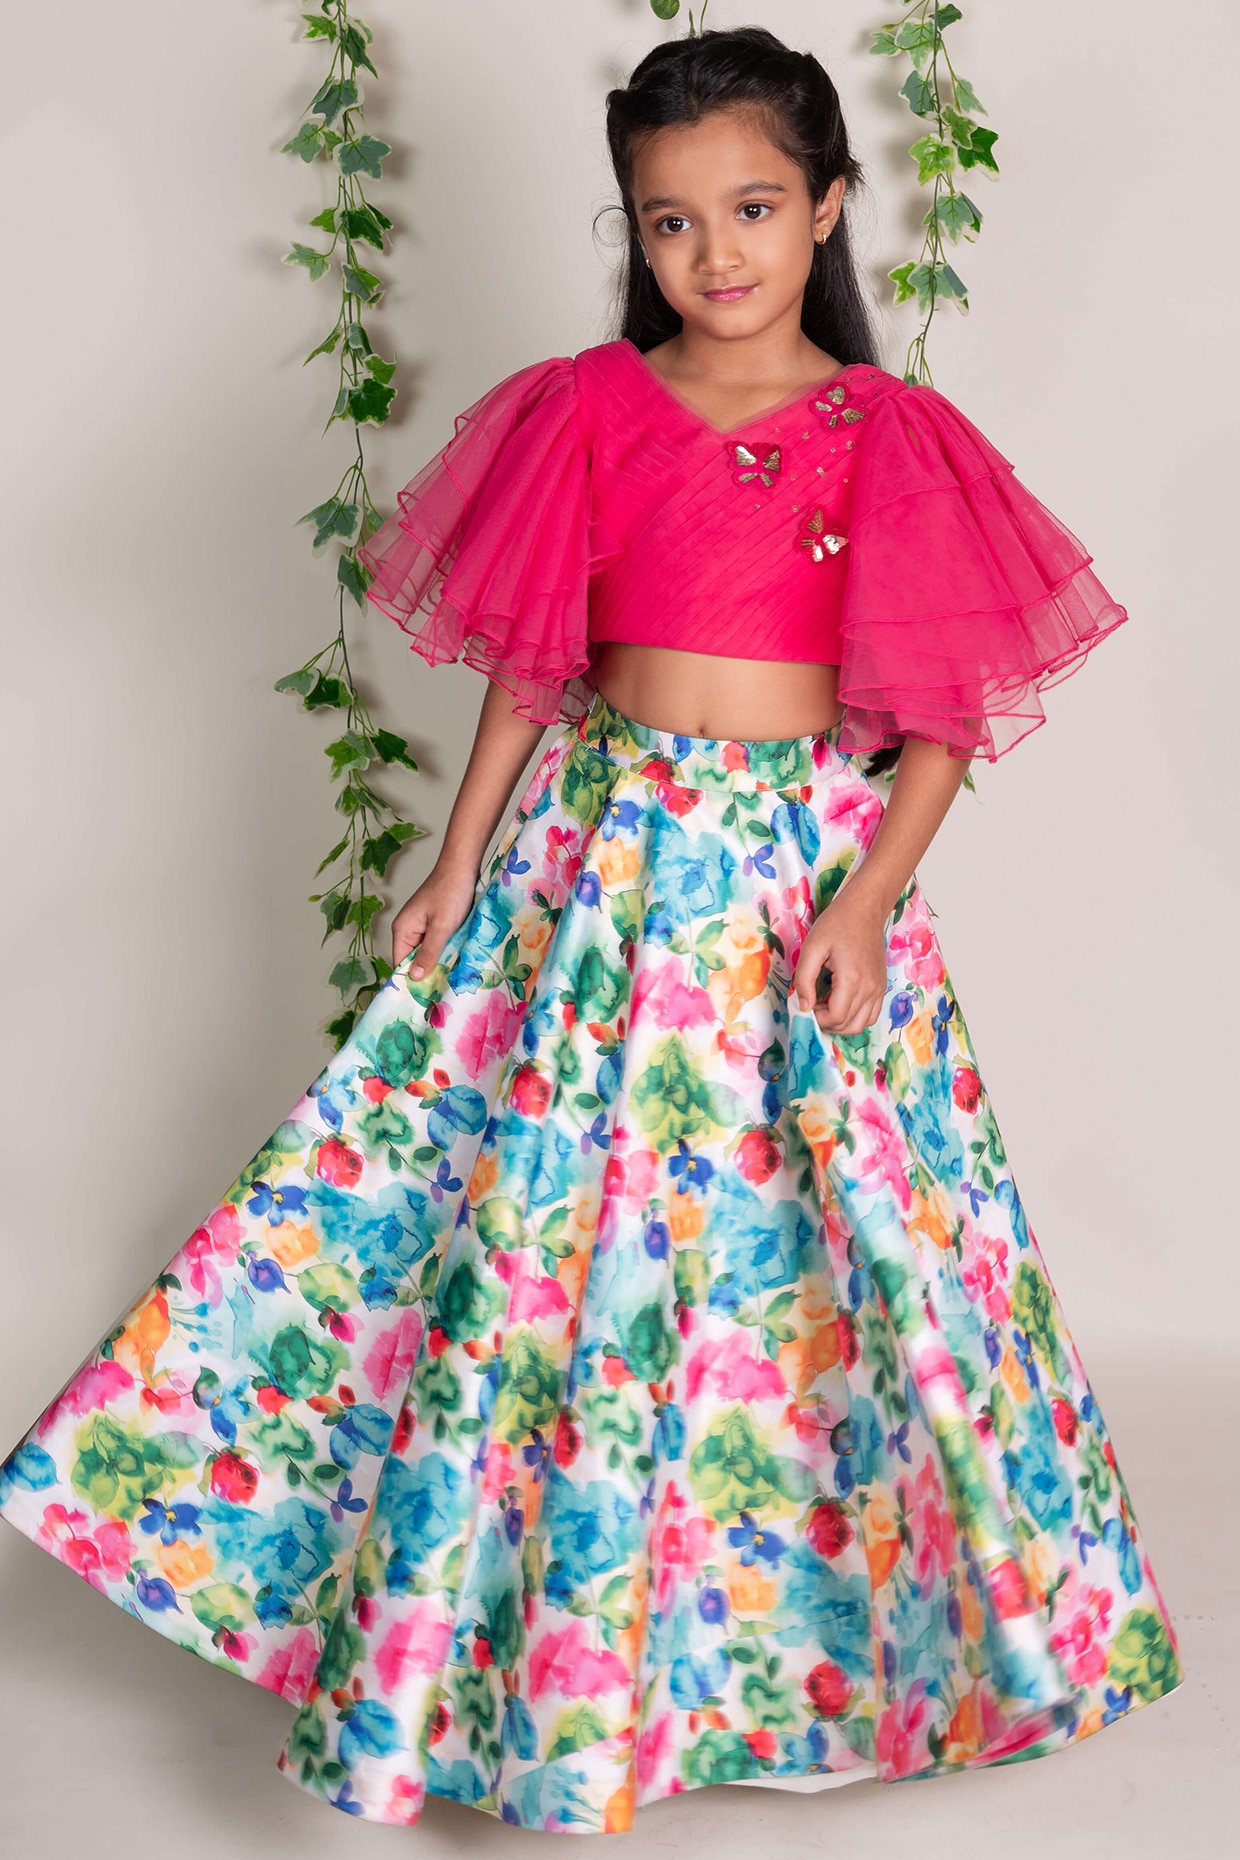 Buy Gothic Olive Lehenga And A Crop Top Set In Shimmer Crush, Crop Top  Comesi In Full Sleeves With Afrill On The Top